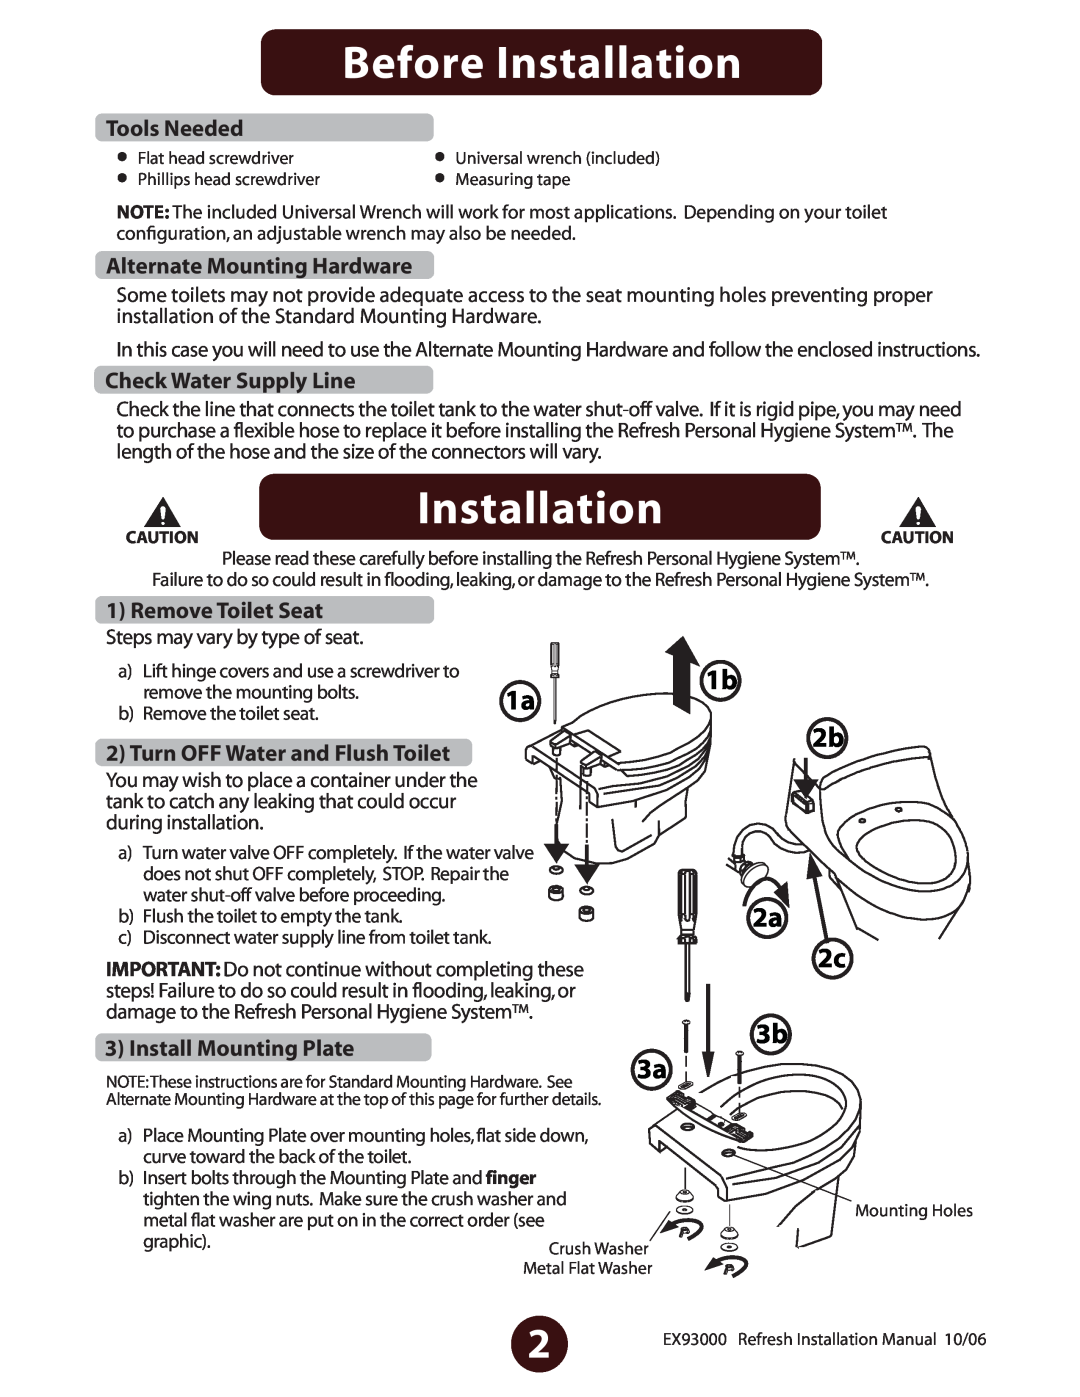 Jacuzzi EV77959 Before Installation, 1b 2b 2a 2c 3b 3a, Tools Needed, Alternate Mounting Hardware, Check Water Supply Line 